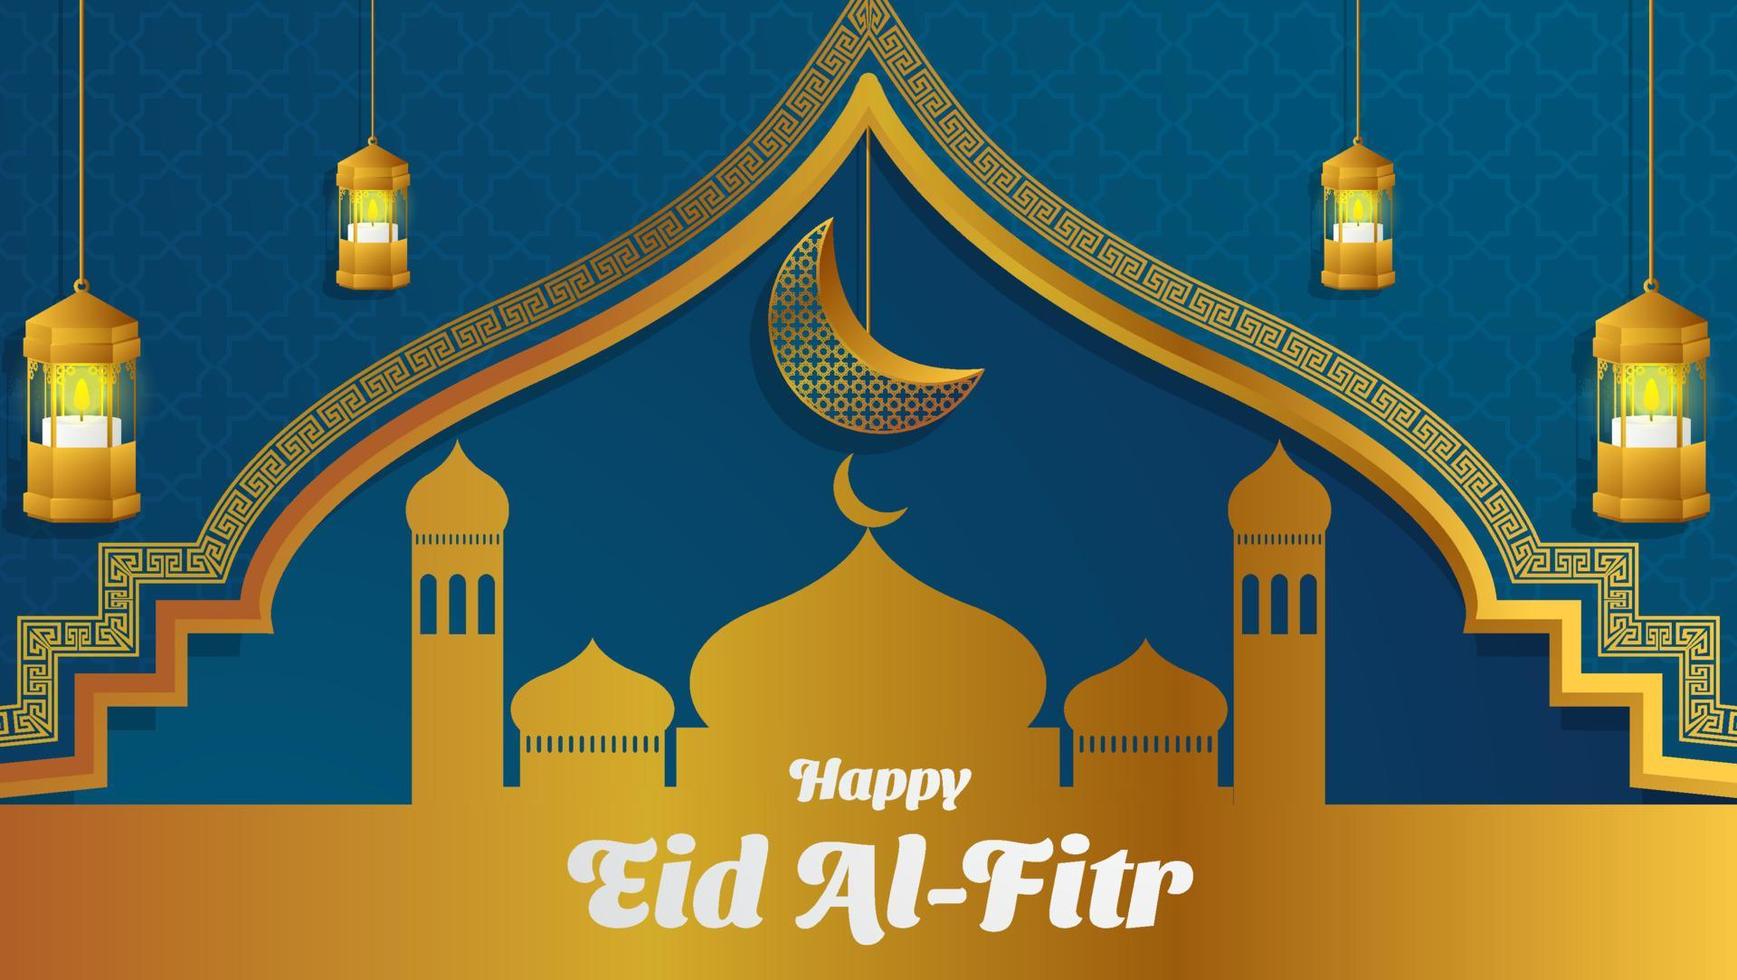 Happy eid al-fitr background in gold and blue color. islamic vector illustration